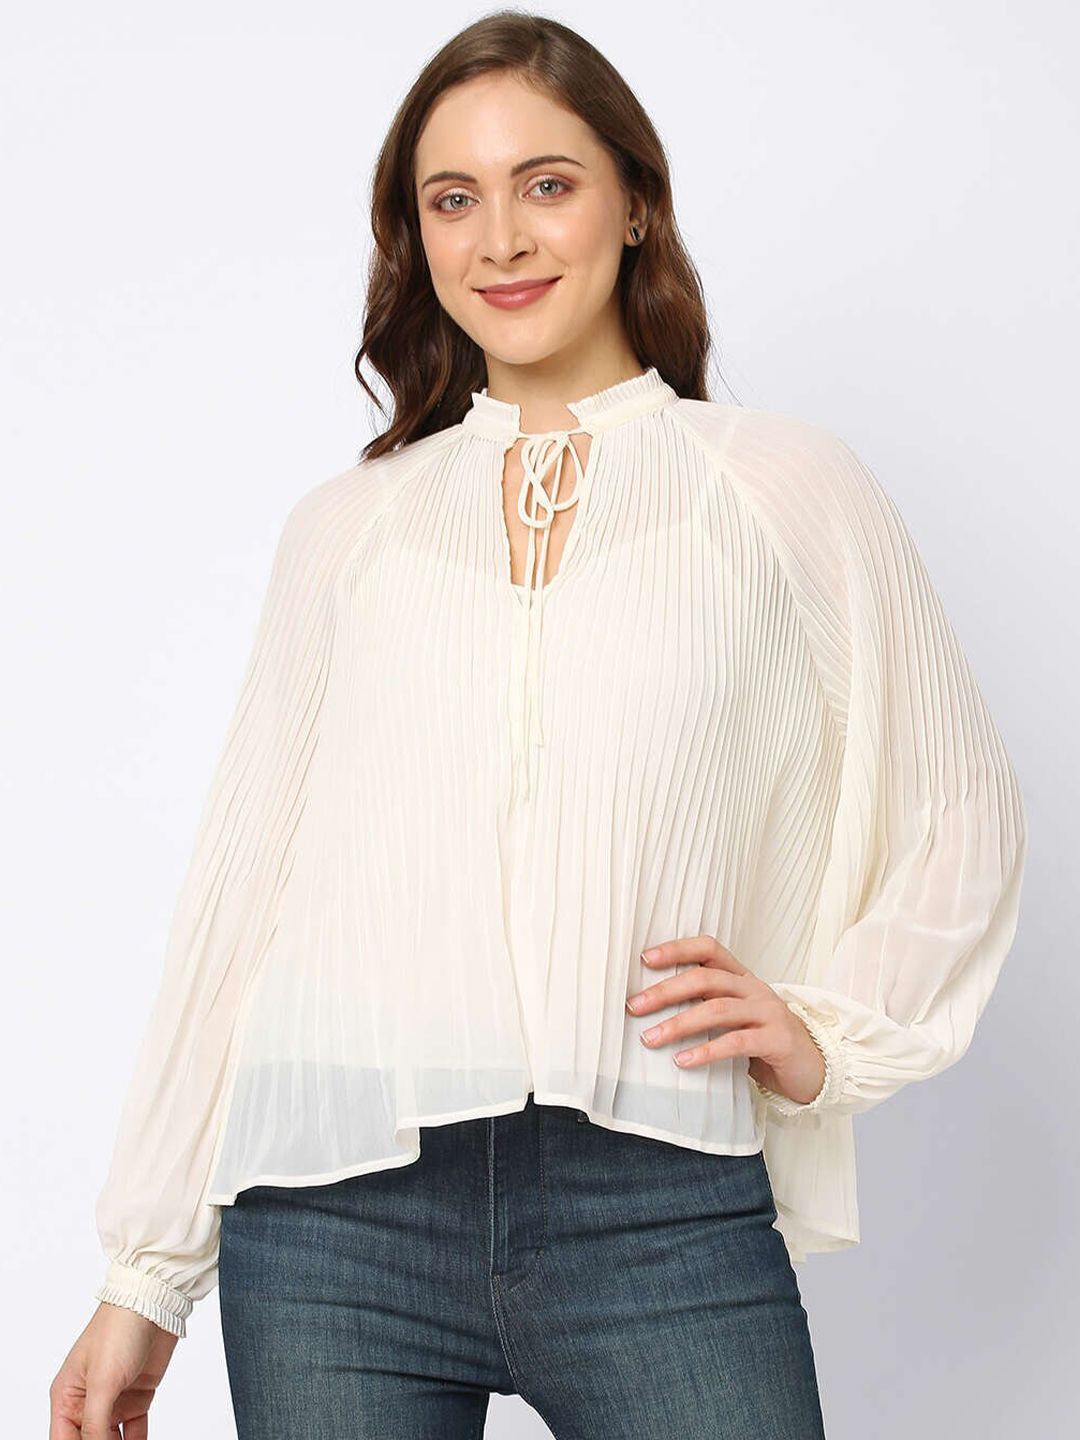 Pepe Jeans Cream Pleated Tie-Up Neck Top Price in India